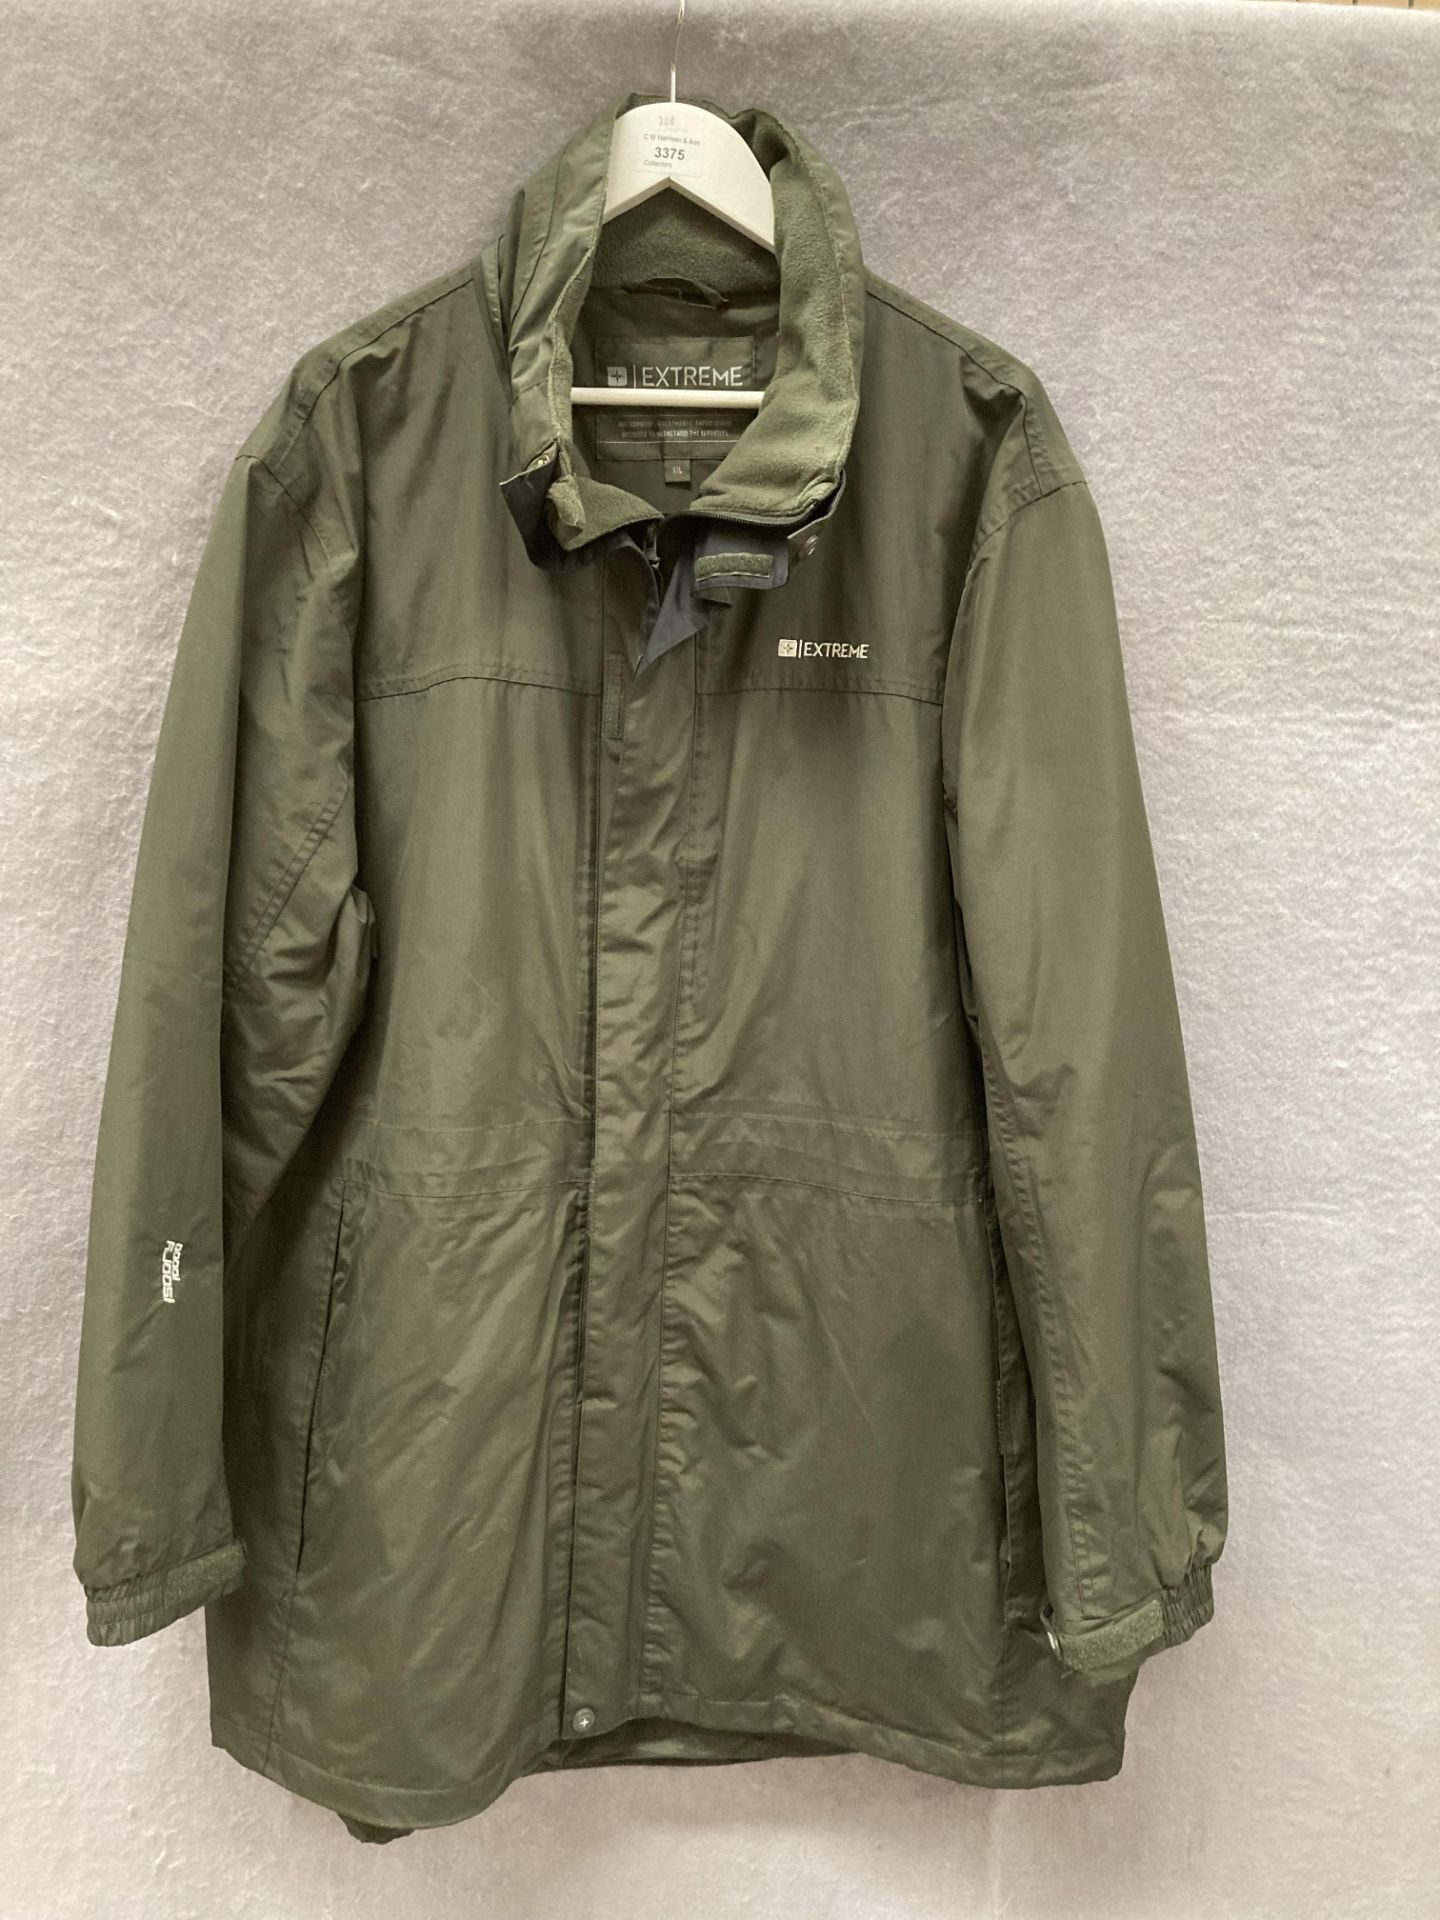 An Extreme by Mountain Warehouse Isodry 10,000 dark green waterproof jacket,